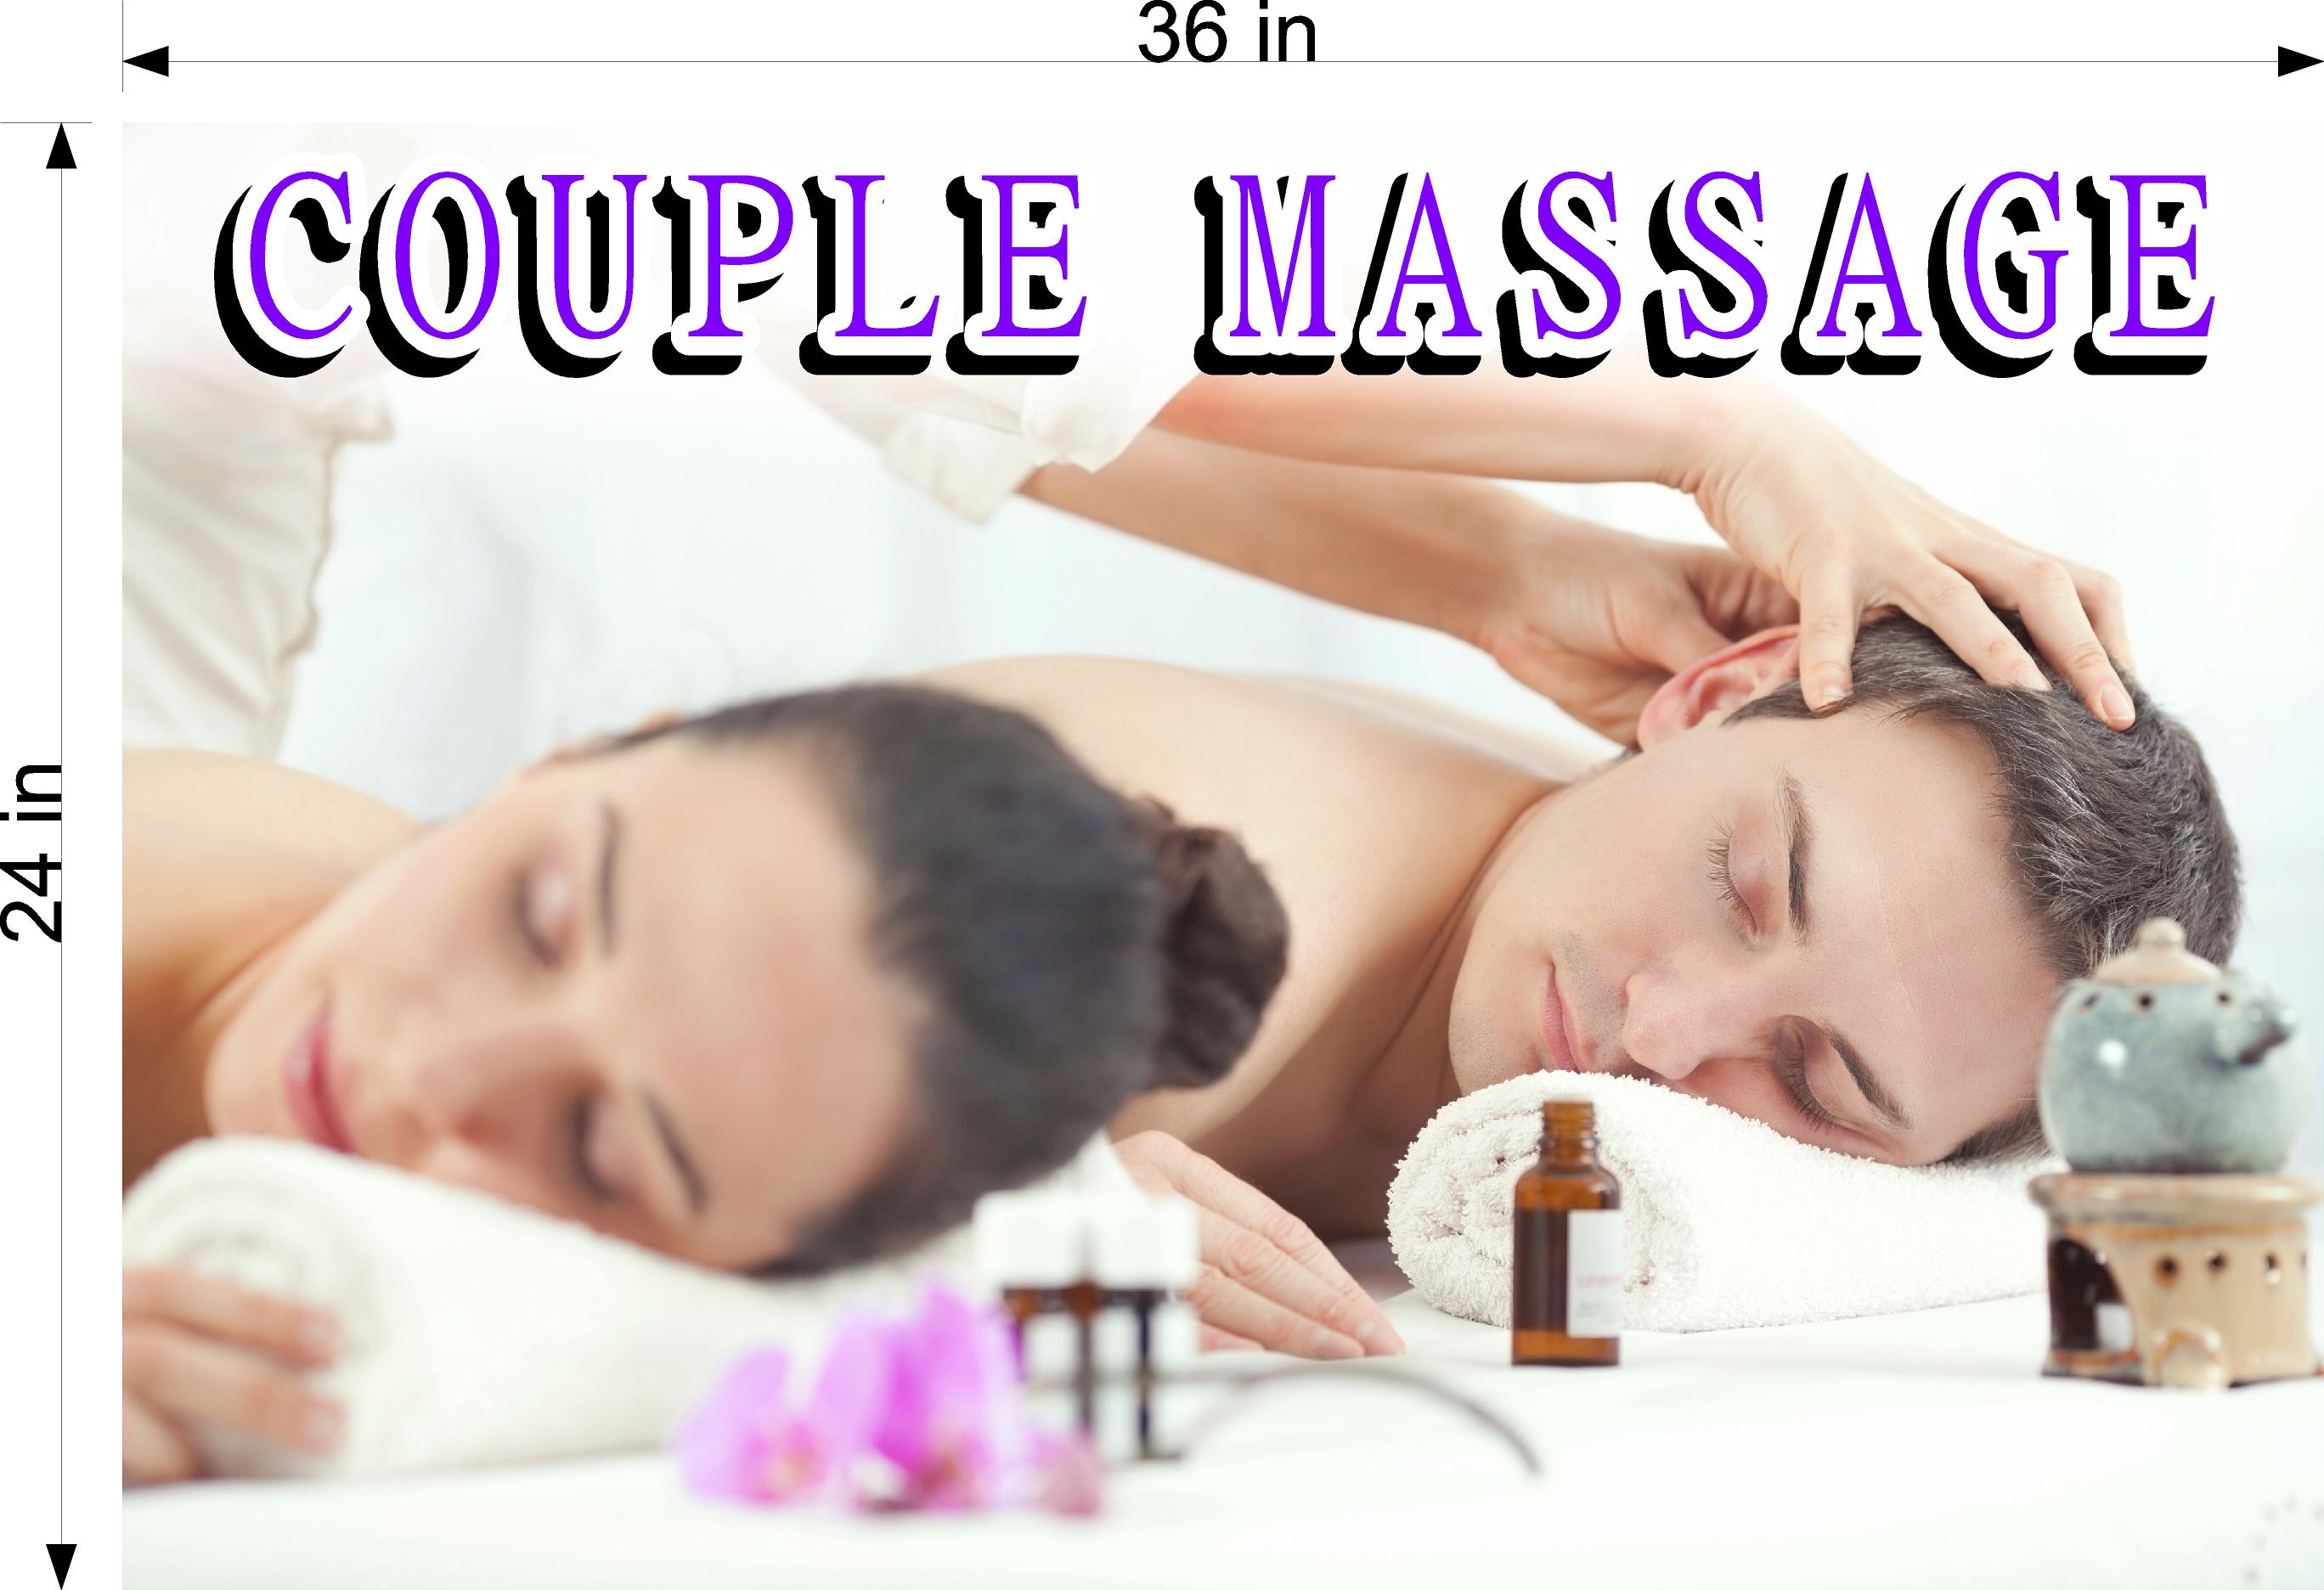 Massage 09 Wallpaper Poster Decal with Adhesive Backing Wall Sticker Decor Indoors Interior Sign Horizontal